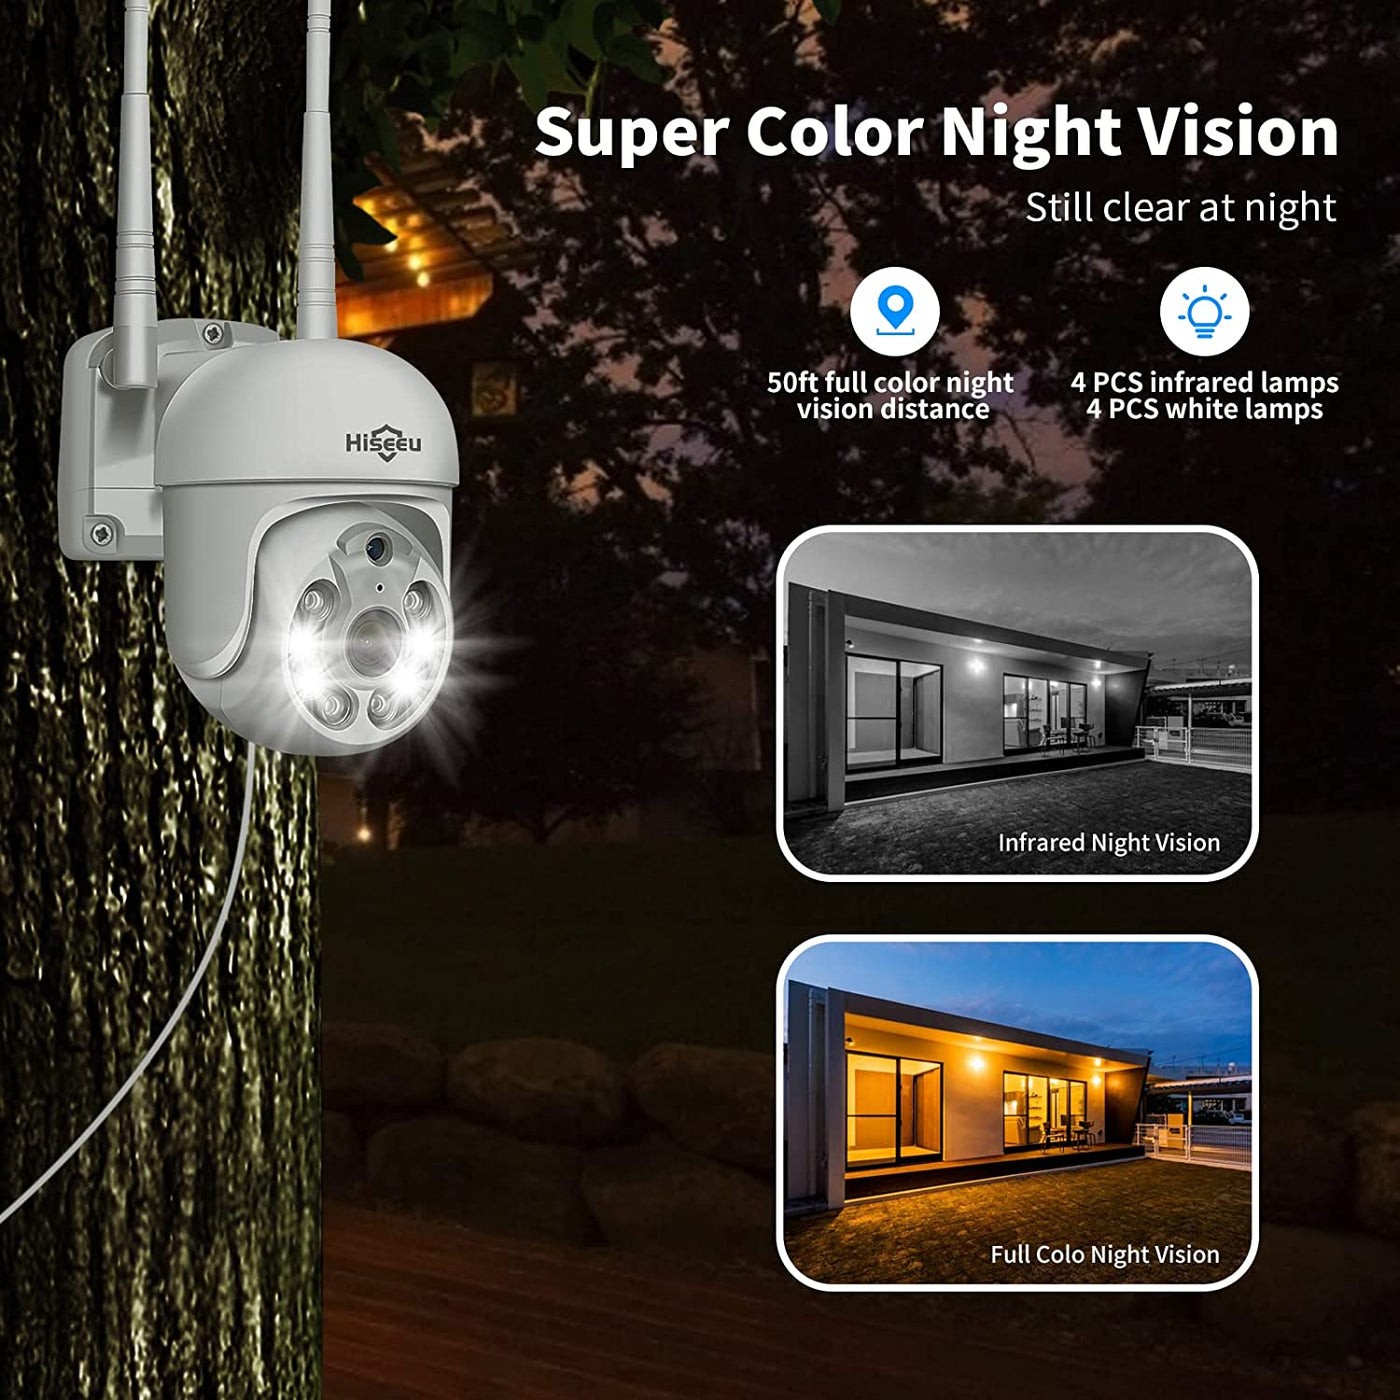 Pan/Tilt/Zoom Security Camera 3MP Outdoor Wireless Surveillance Camera Floodlights Full Color Night Vision Two Way Audio IP66 Waterproof Motion Detection Compatible with Alexa